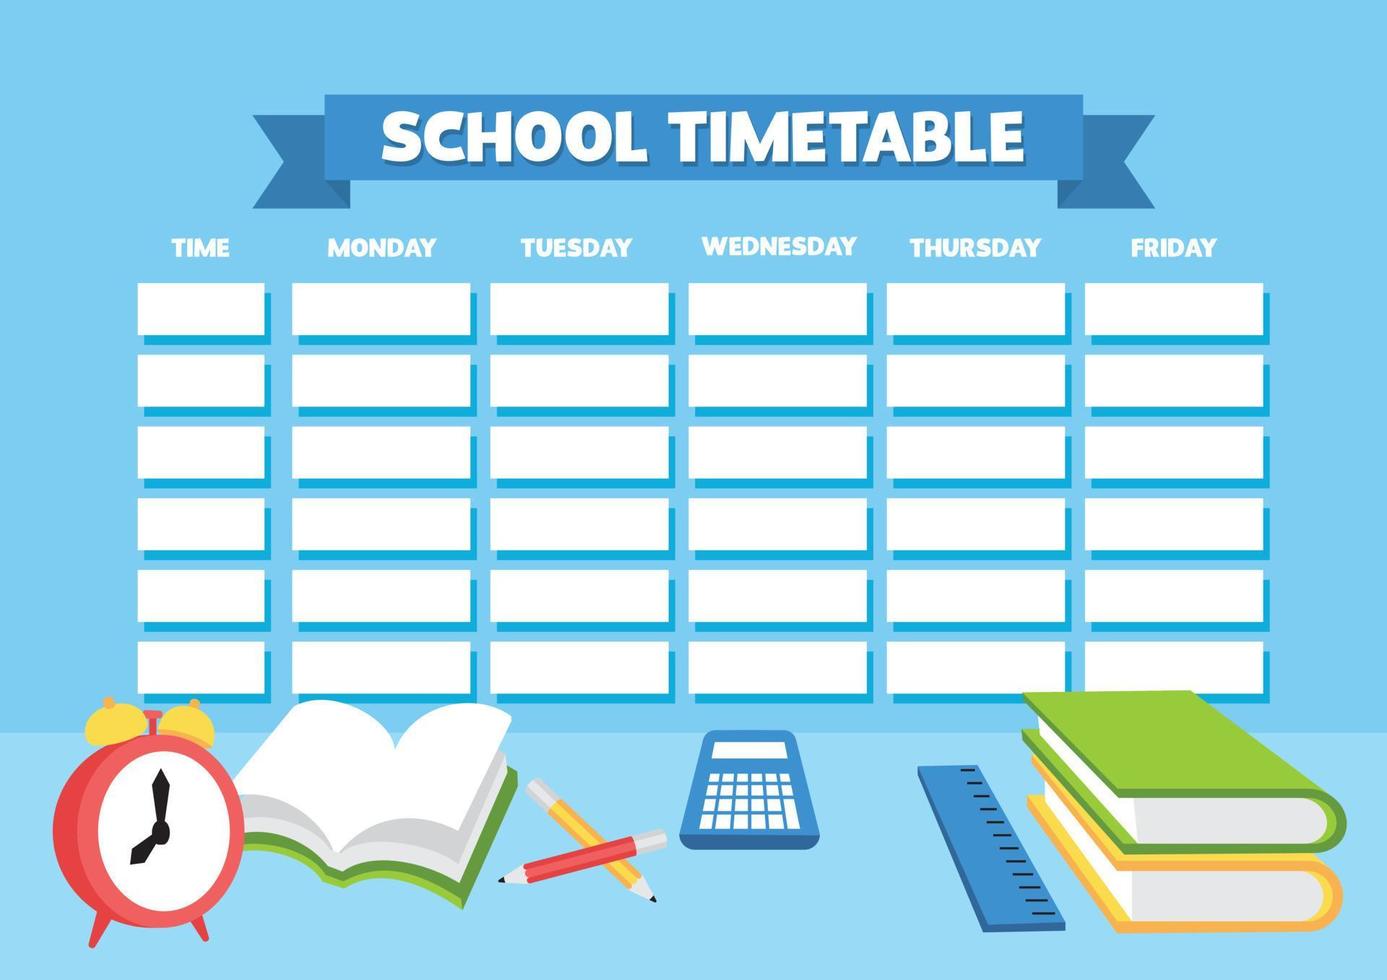 School timetable or lesson schedule template, ready to print vector